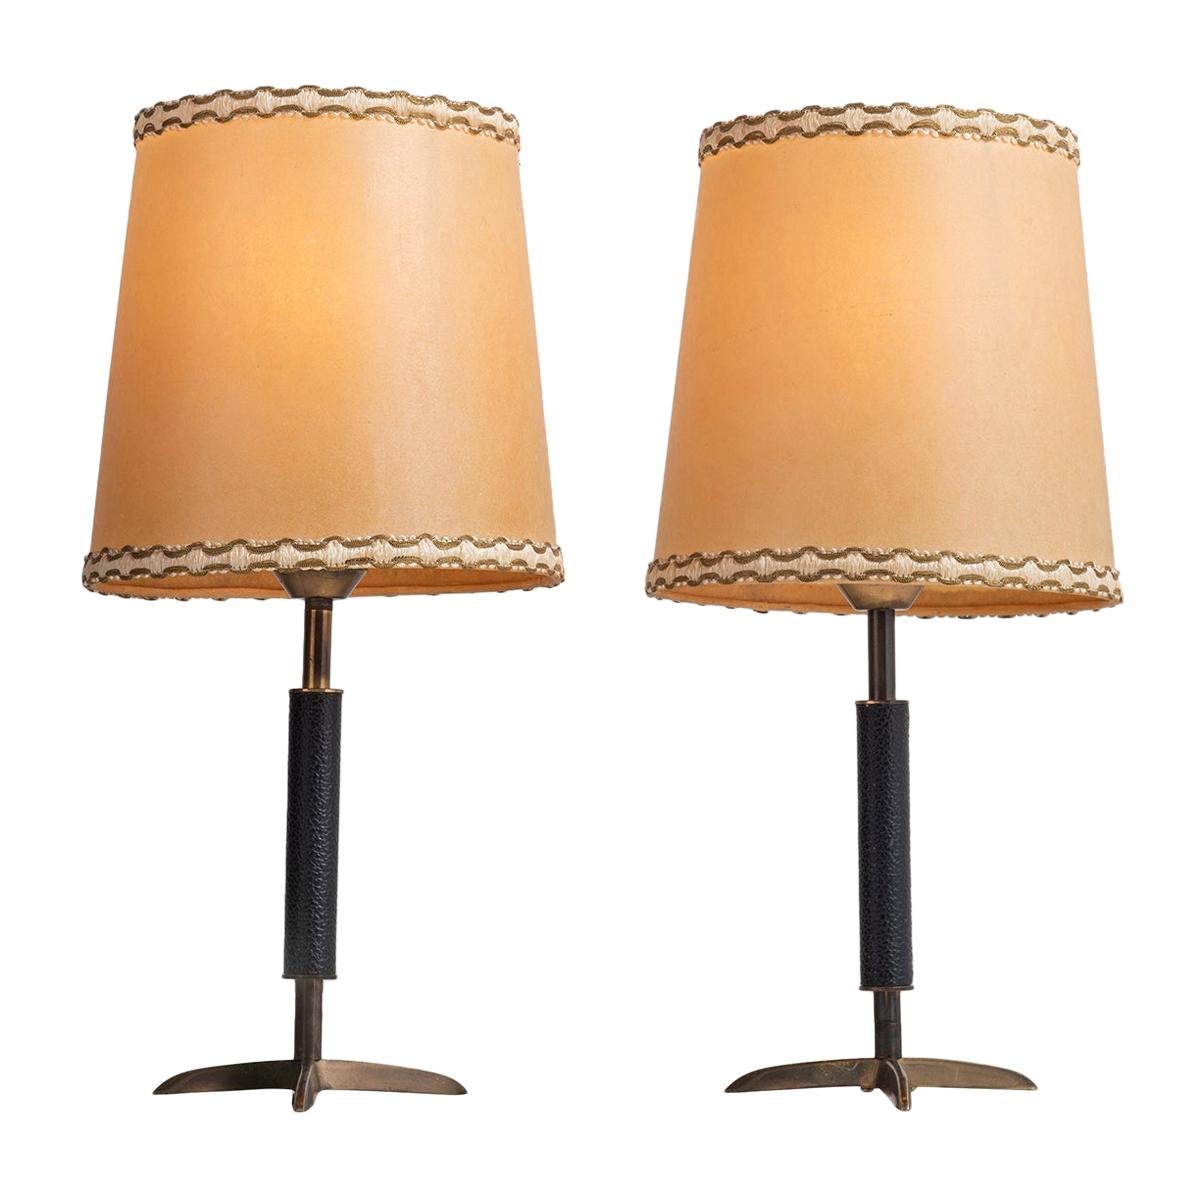 Pair of Stitched Leather and Brass Table Lamps